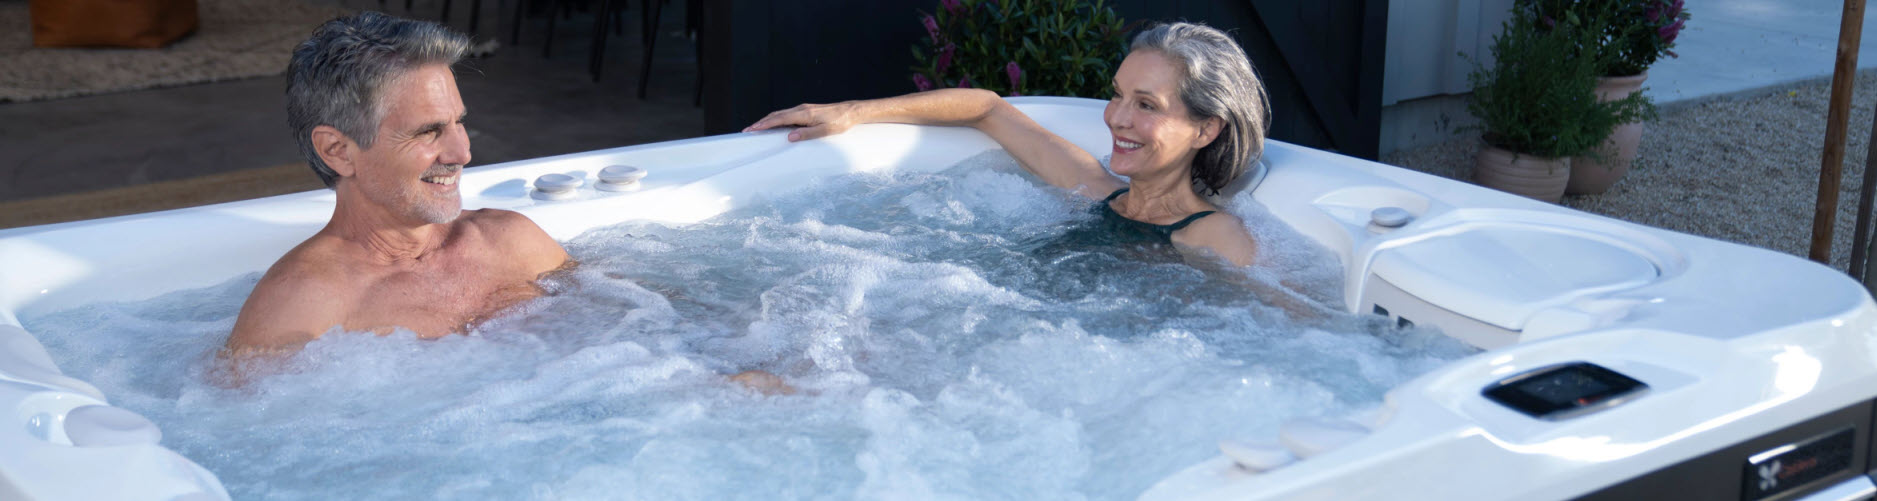 Use a Backyard Spa for Exercise, Hot Tub Deals Near Steamboat Springs